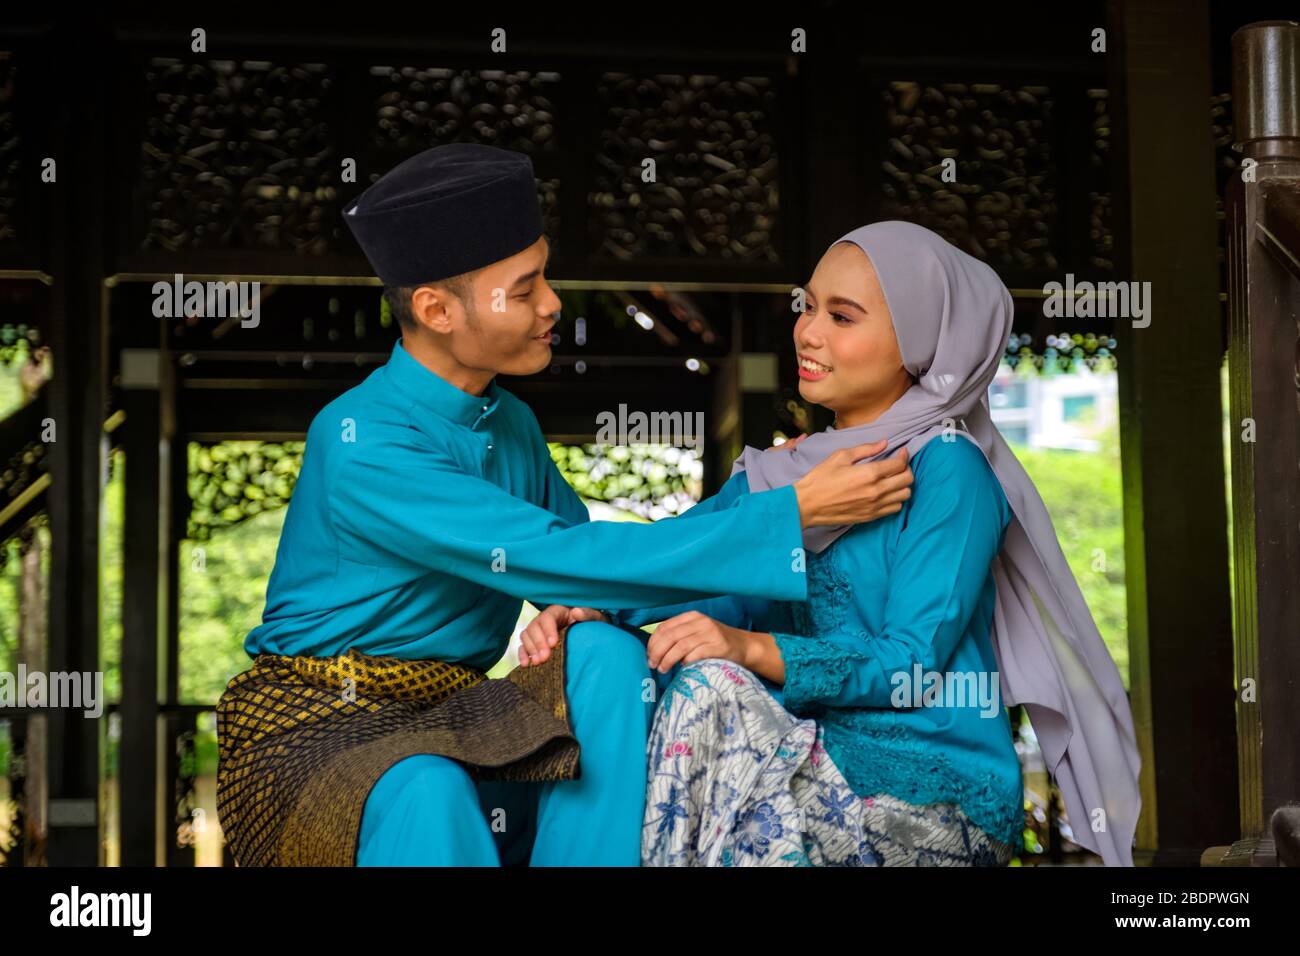 A portrait of young couple of malay muslim in traditional costume showing romantic gesture during Aidilfitri celebration. Man adjusting his girlfriend Stock Photo